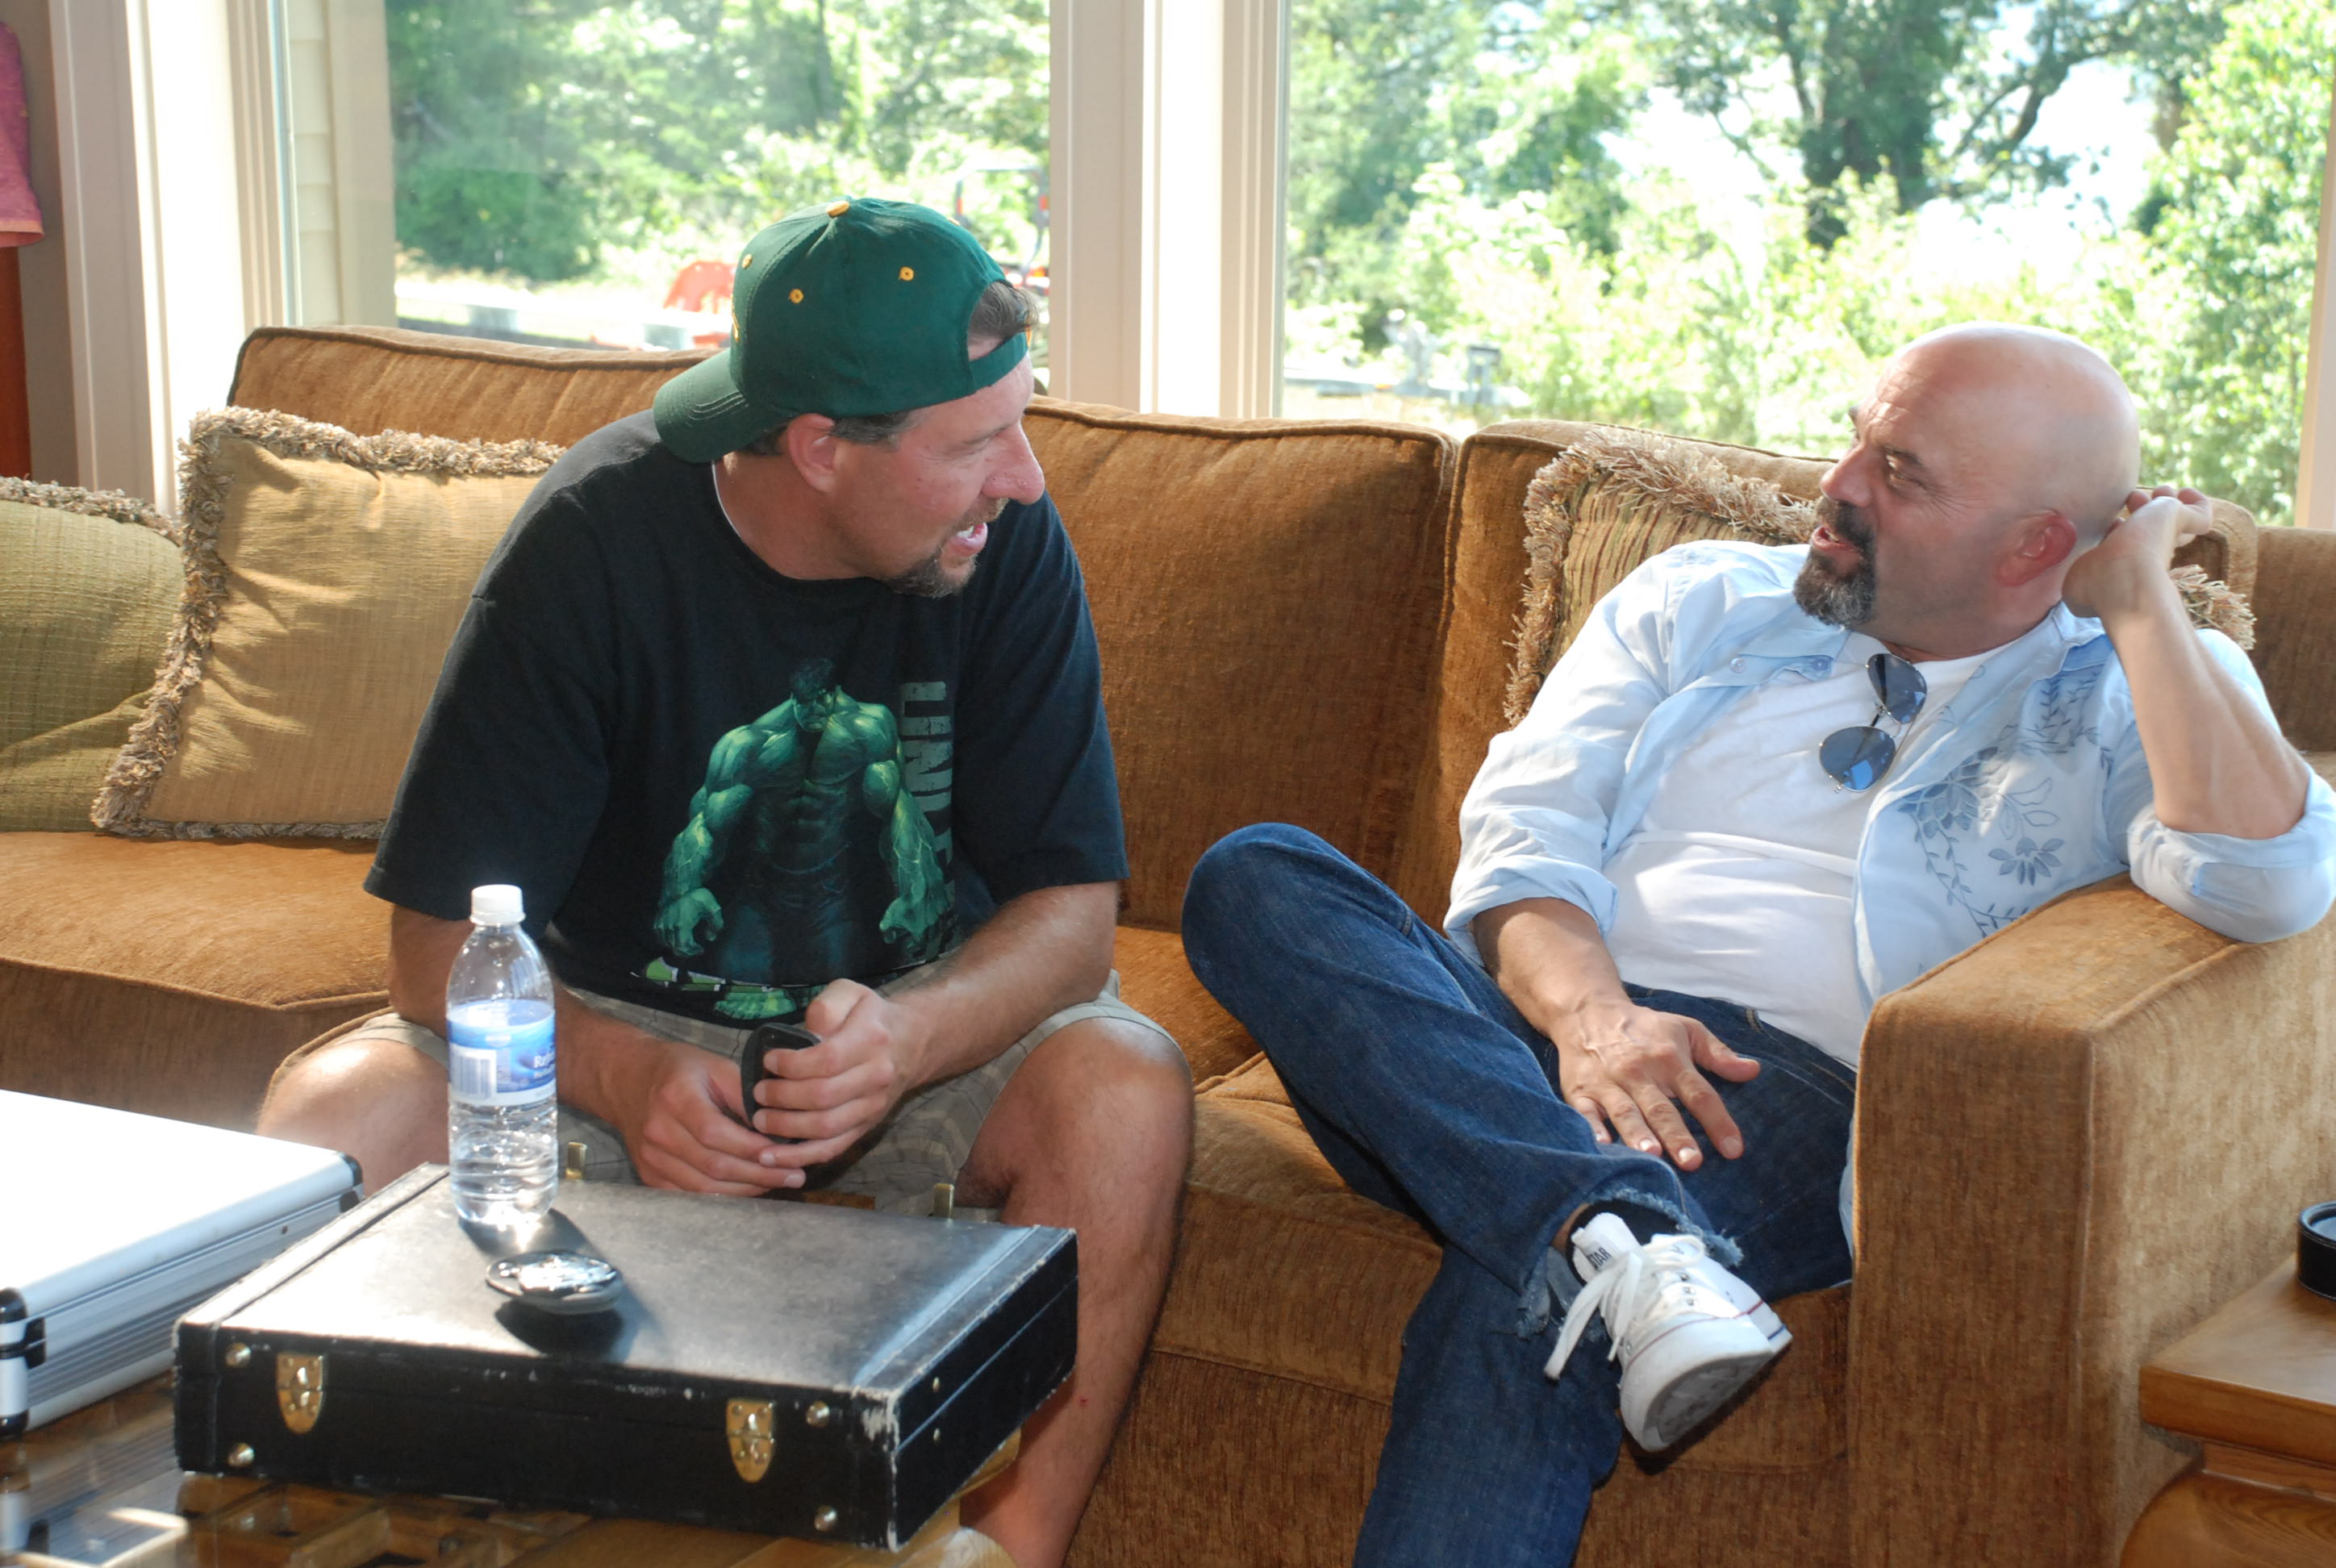 Shooting the bull between takes with Lee Arenberg